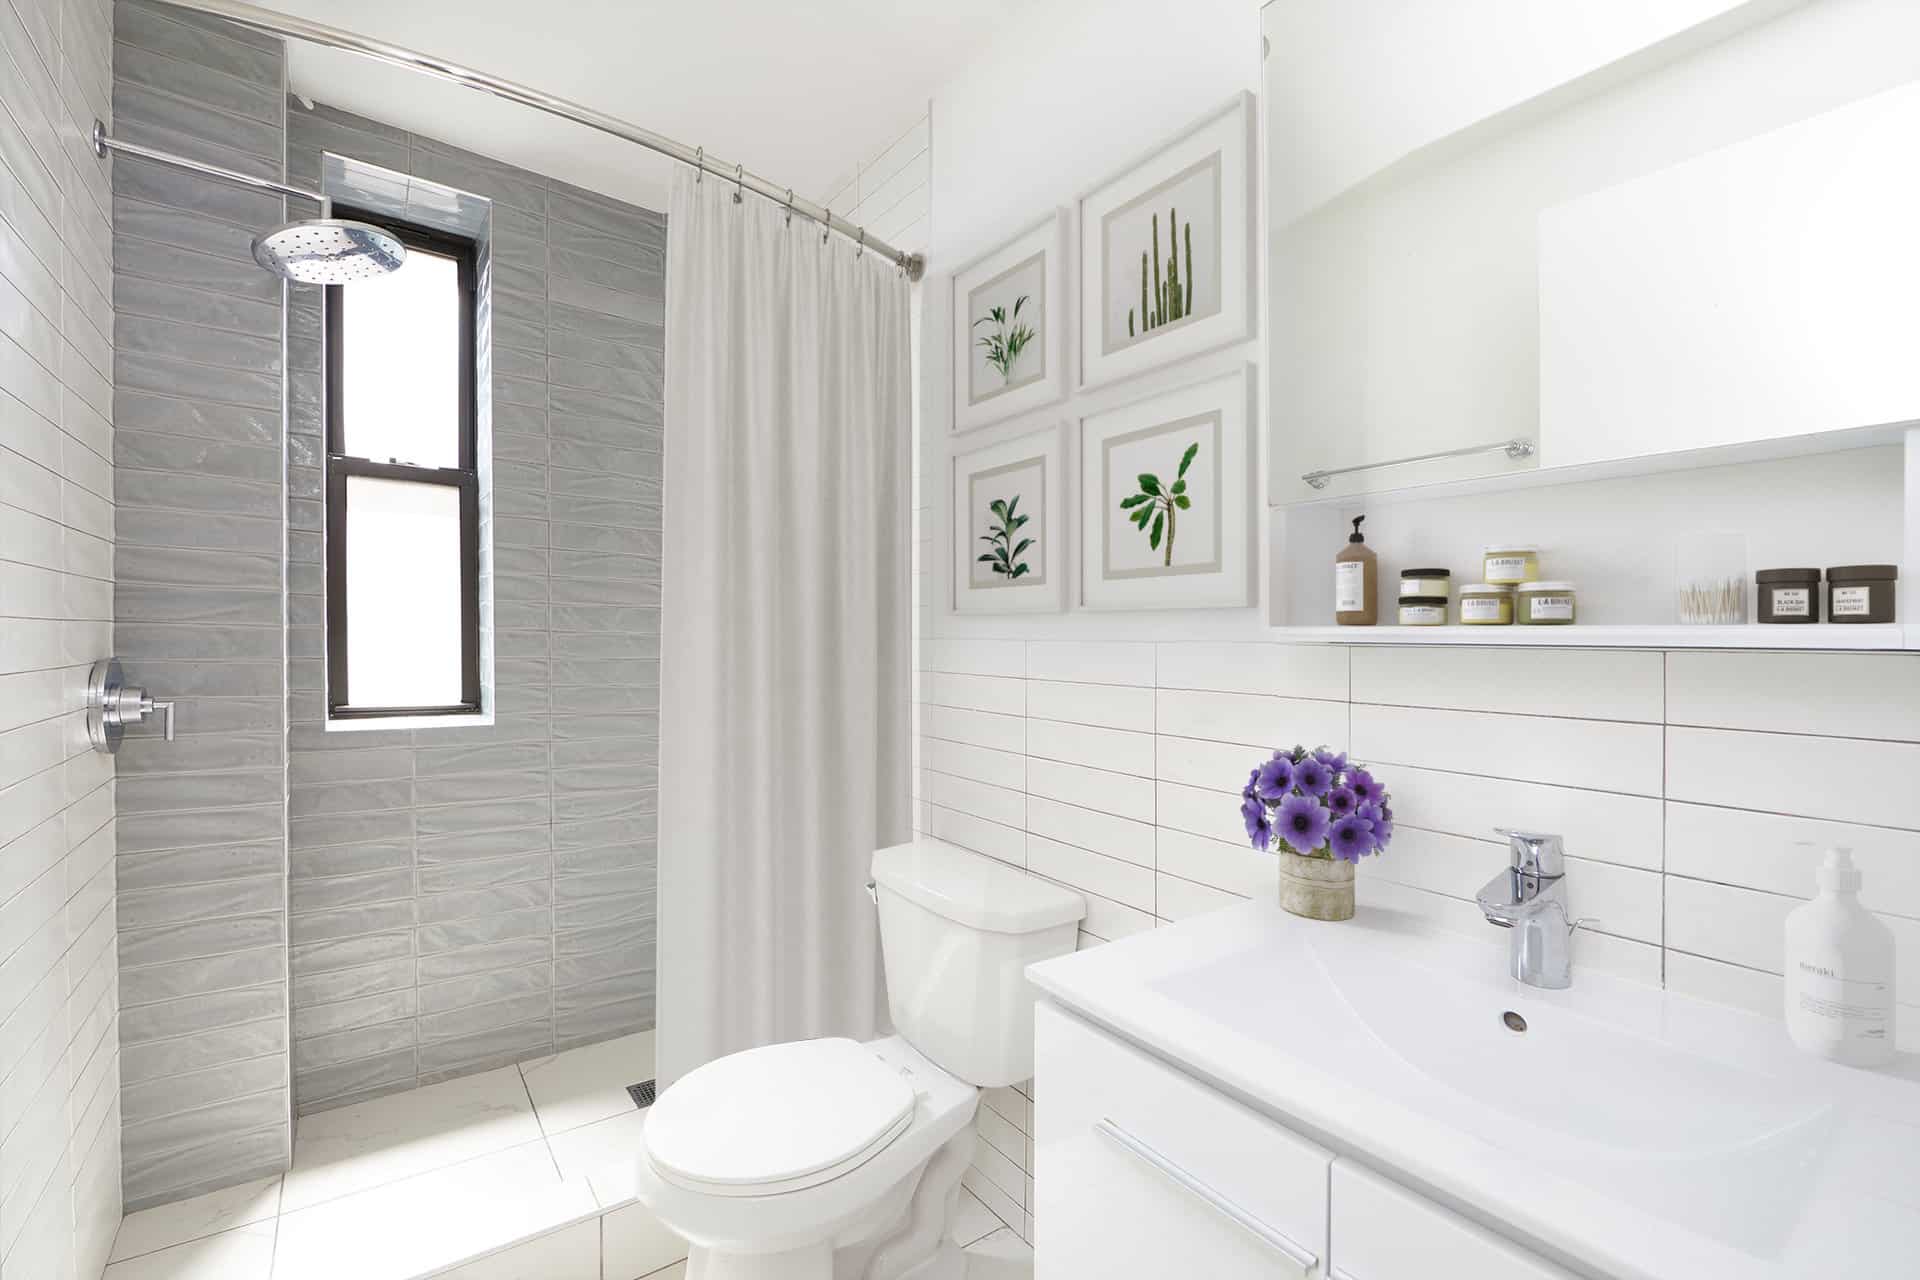 Bathroom at 245 East 30th Street apartments in Kips Bay with tile walls, single vanity, and walk-in shower with a window.